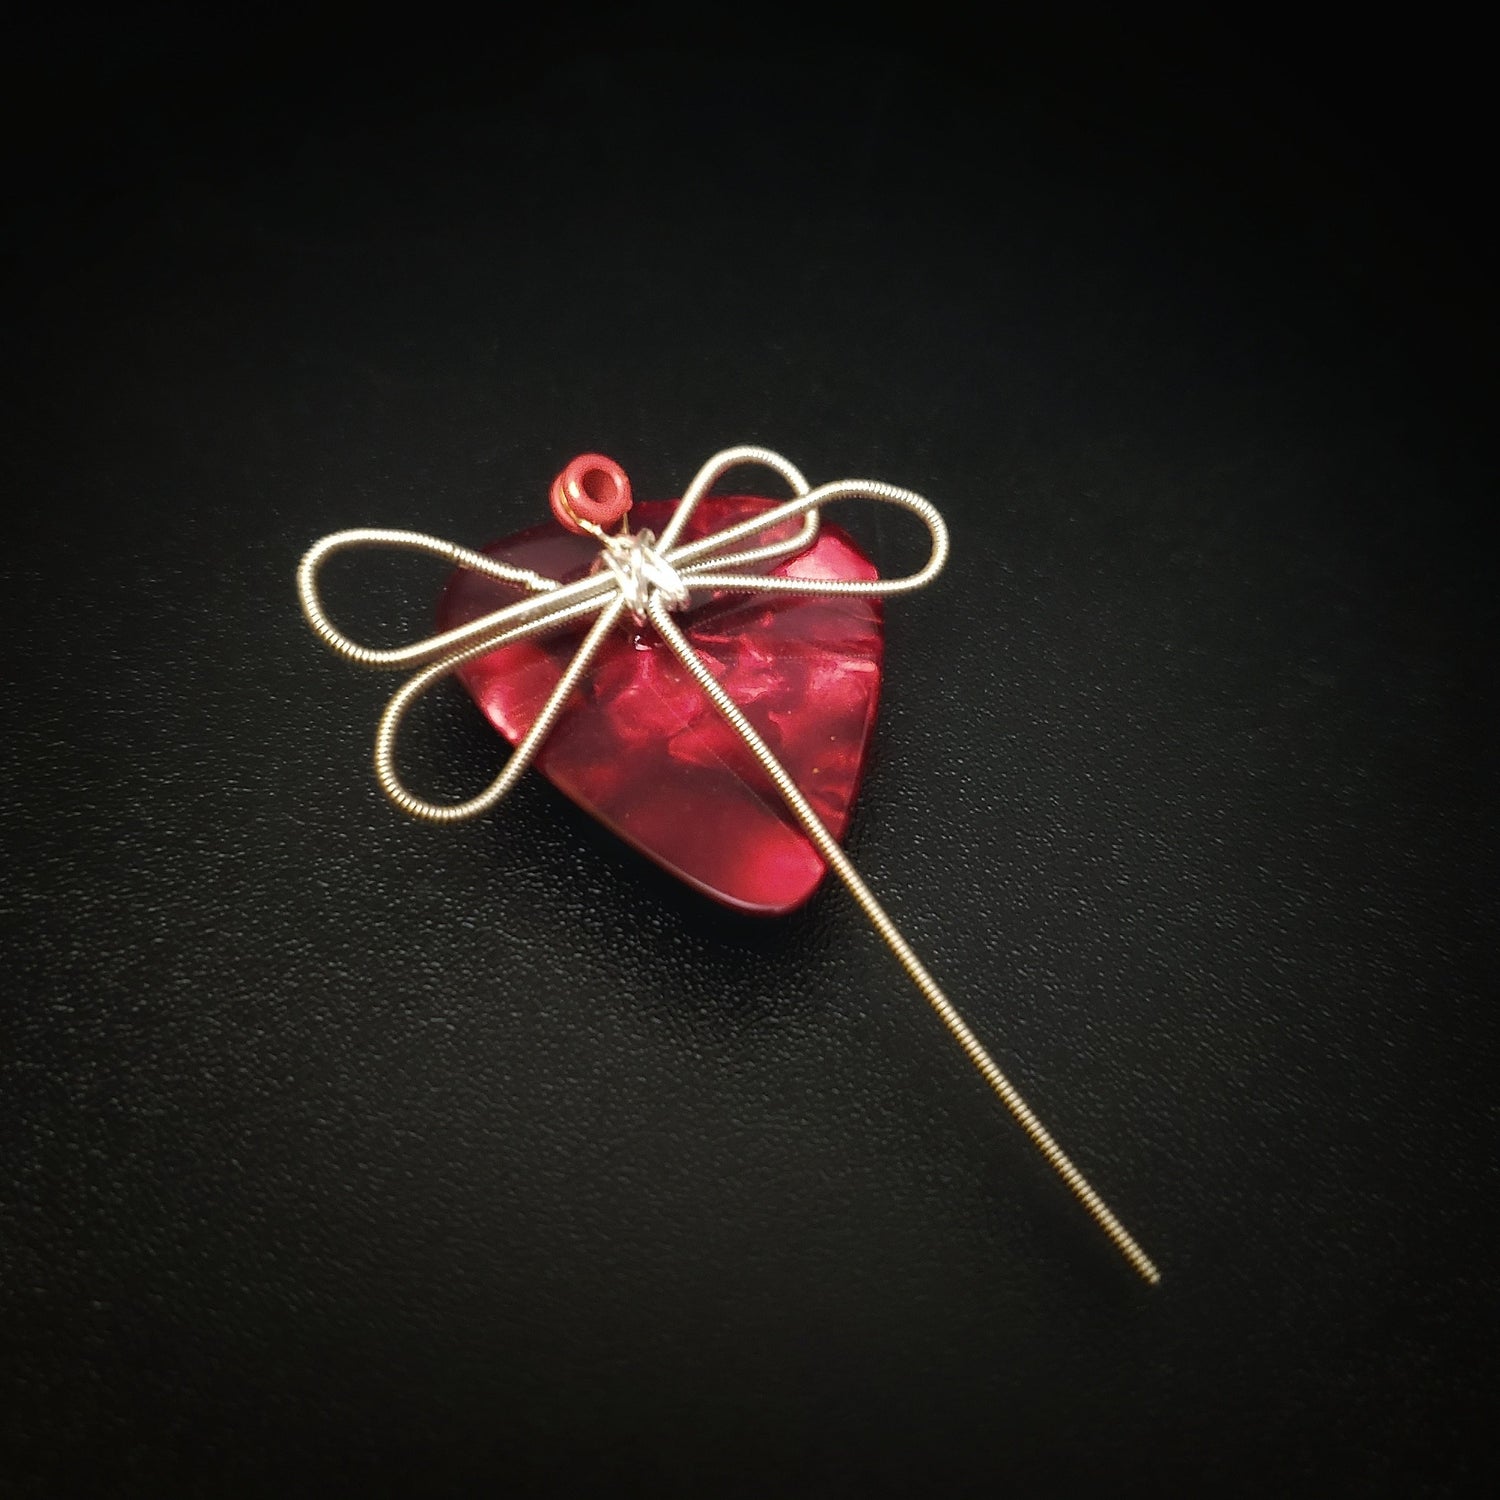 magnet made from an upcycled guitar string shaped like a dragonfly sitting on a dark red guitar pick - black background